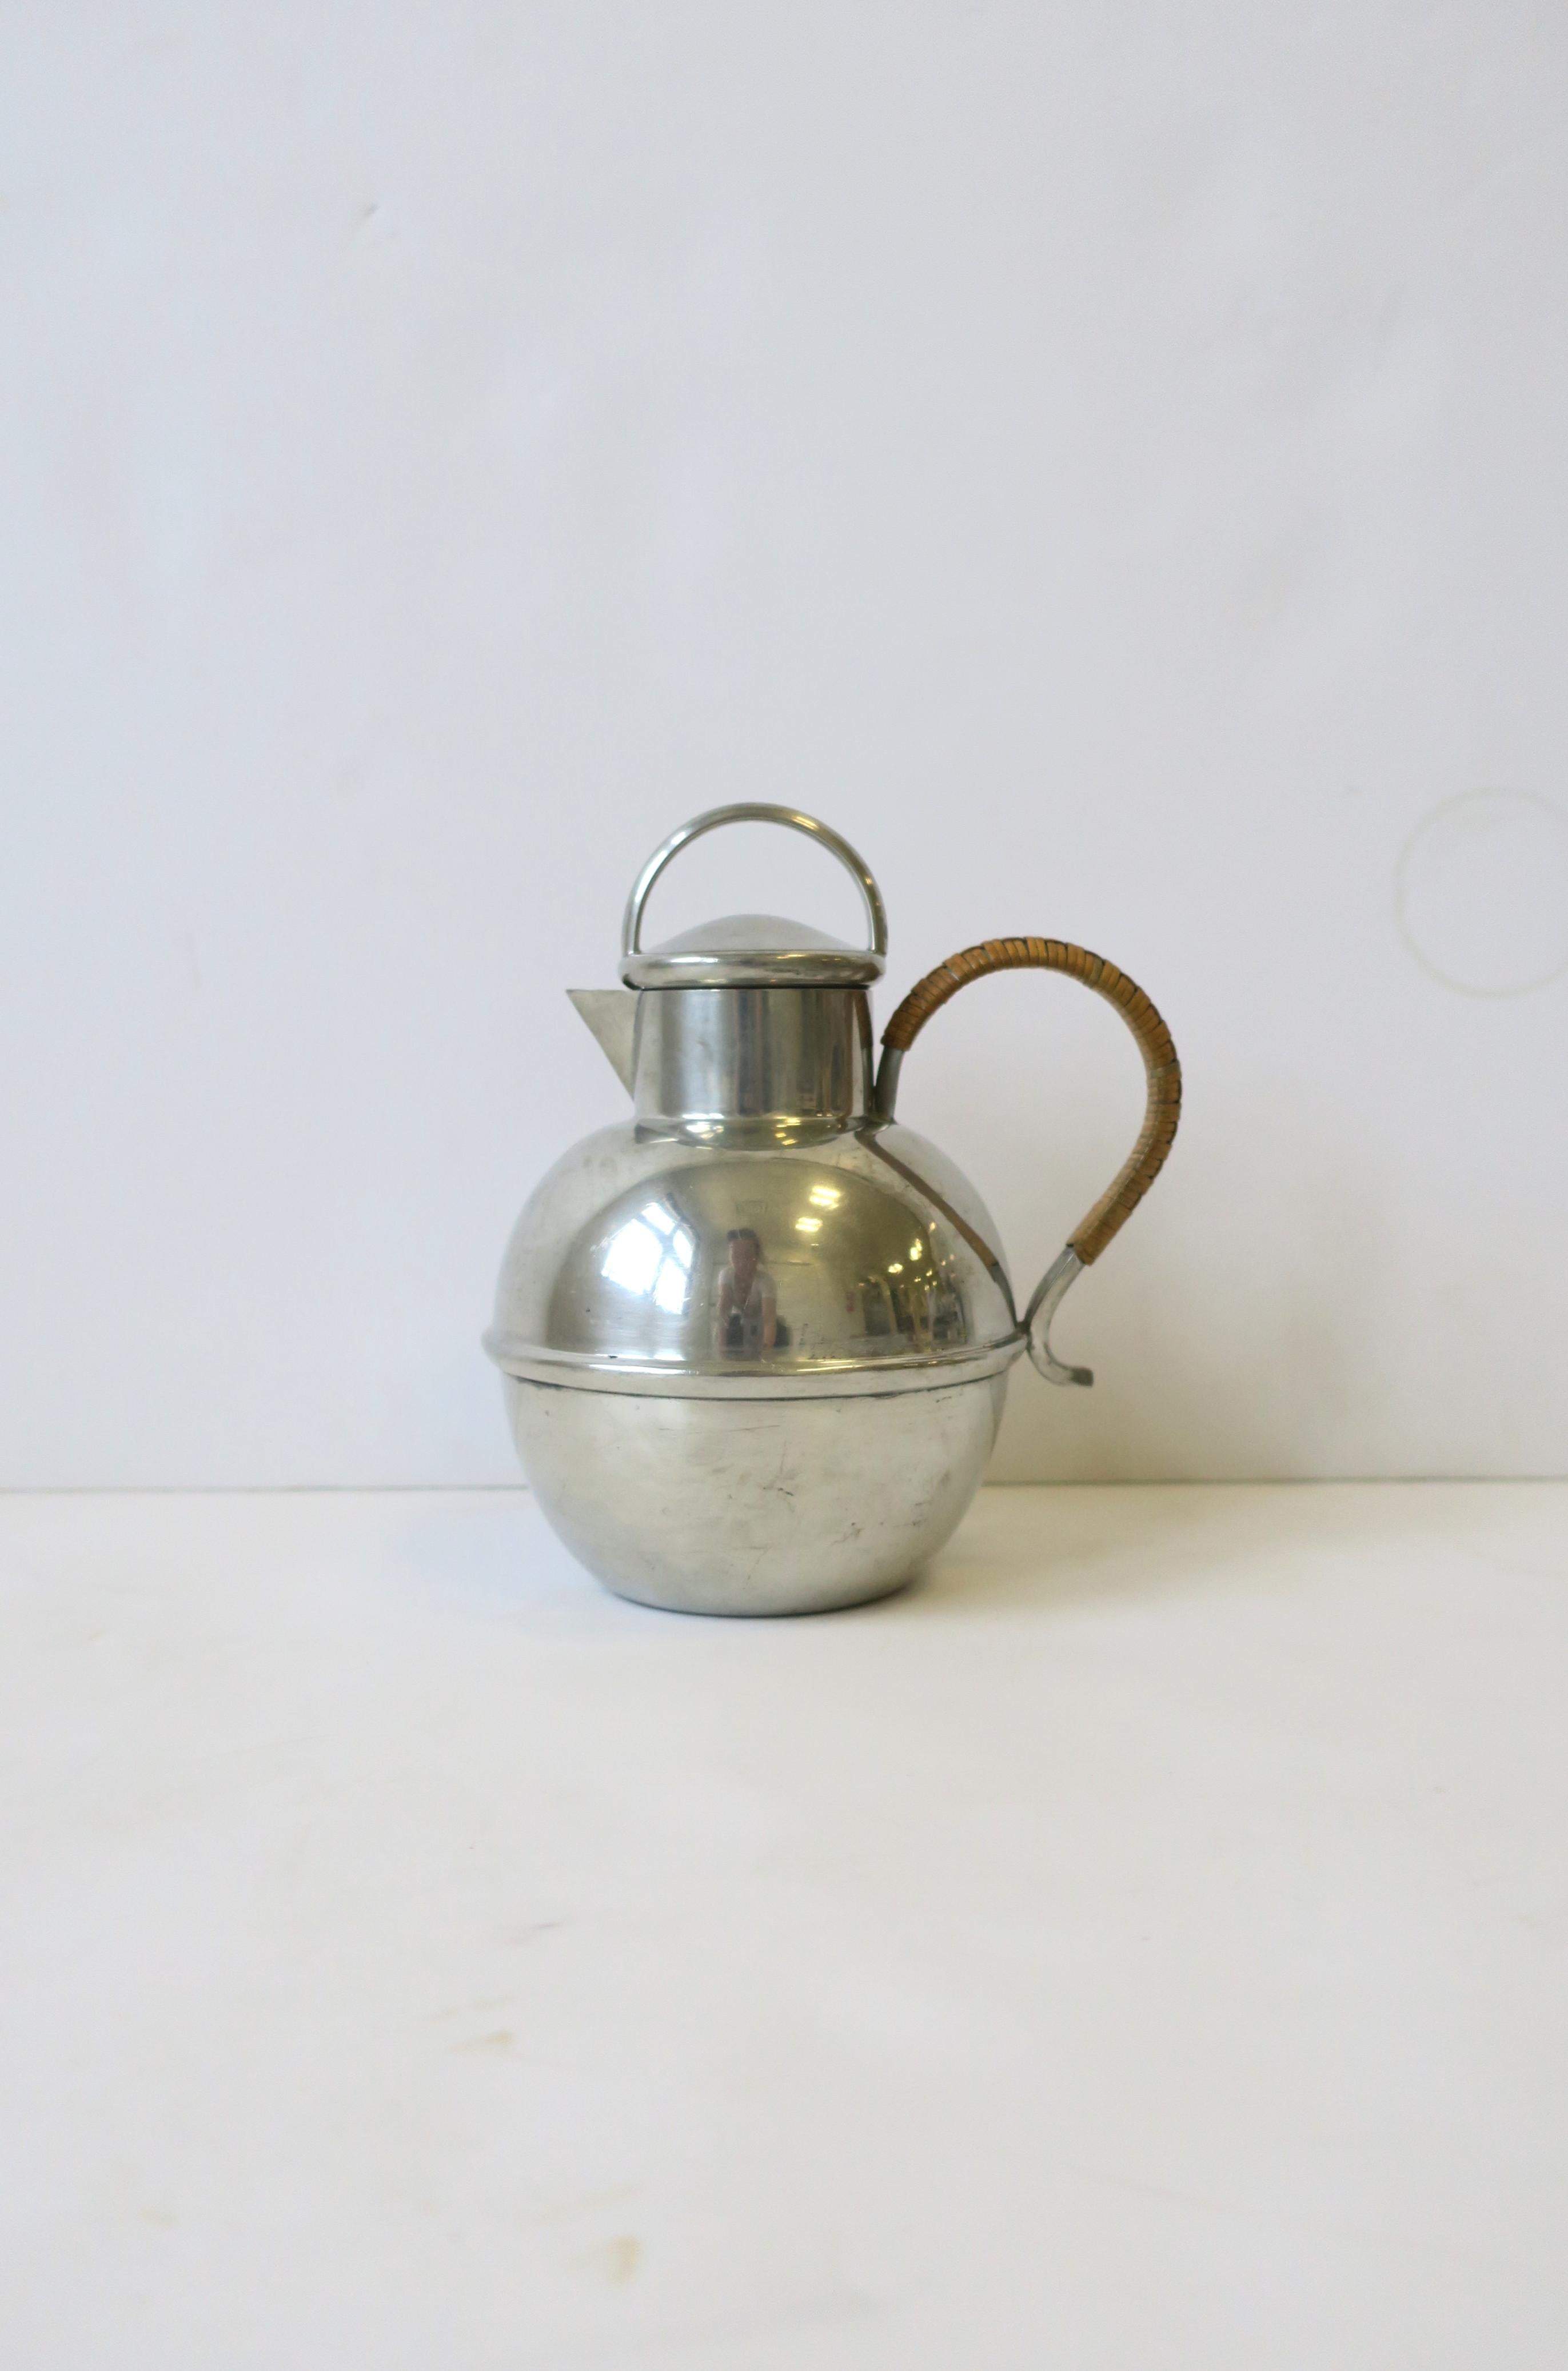 An American silver tone pewter pitcher with wicker handle, circa early-20th century, 1930s, USA (Brooklyn, New York.) Piece was hand-mand in Brooklyn, New York with Danish pewter as marked on bottom. Beautiful as a standalone piece, or for beverages